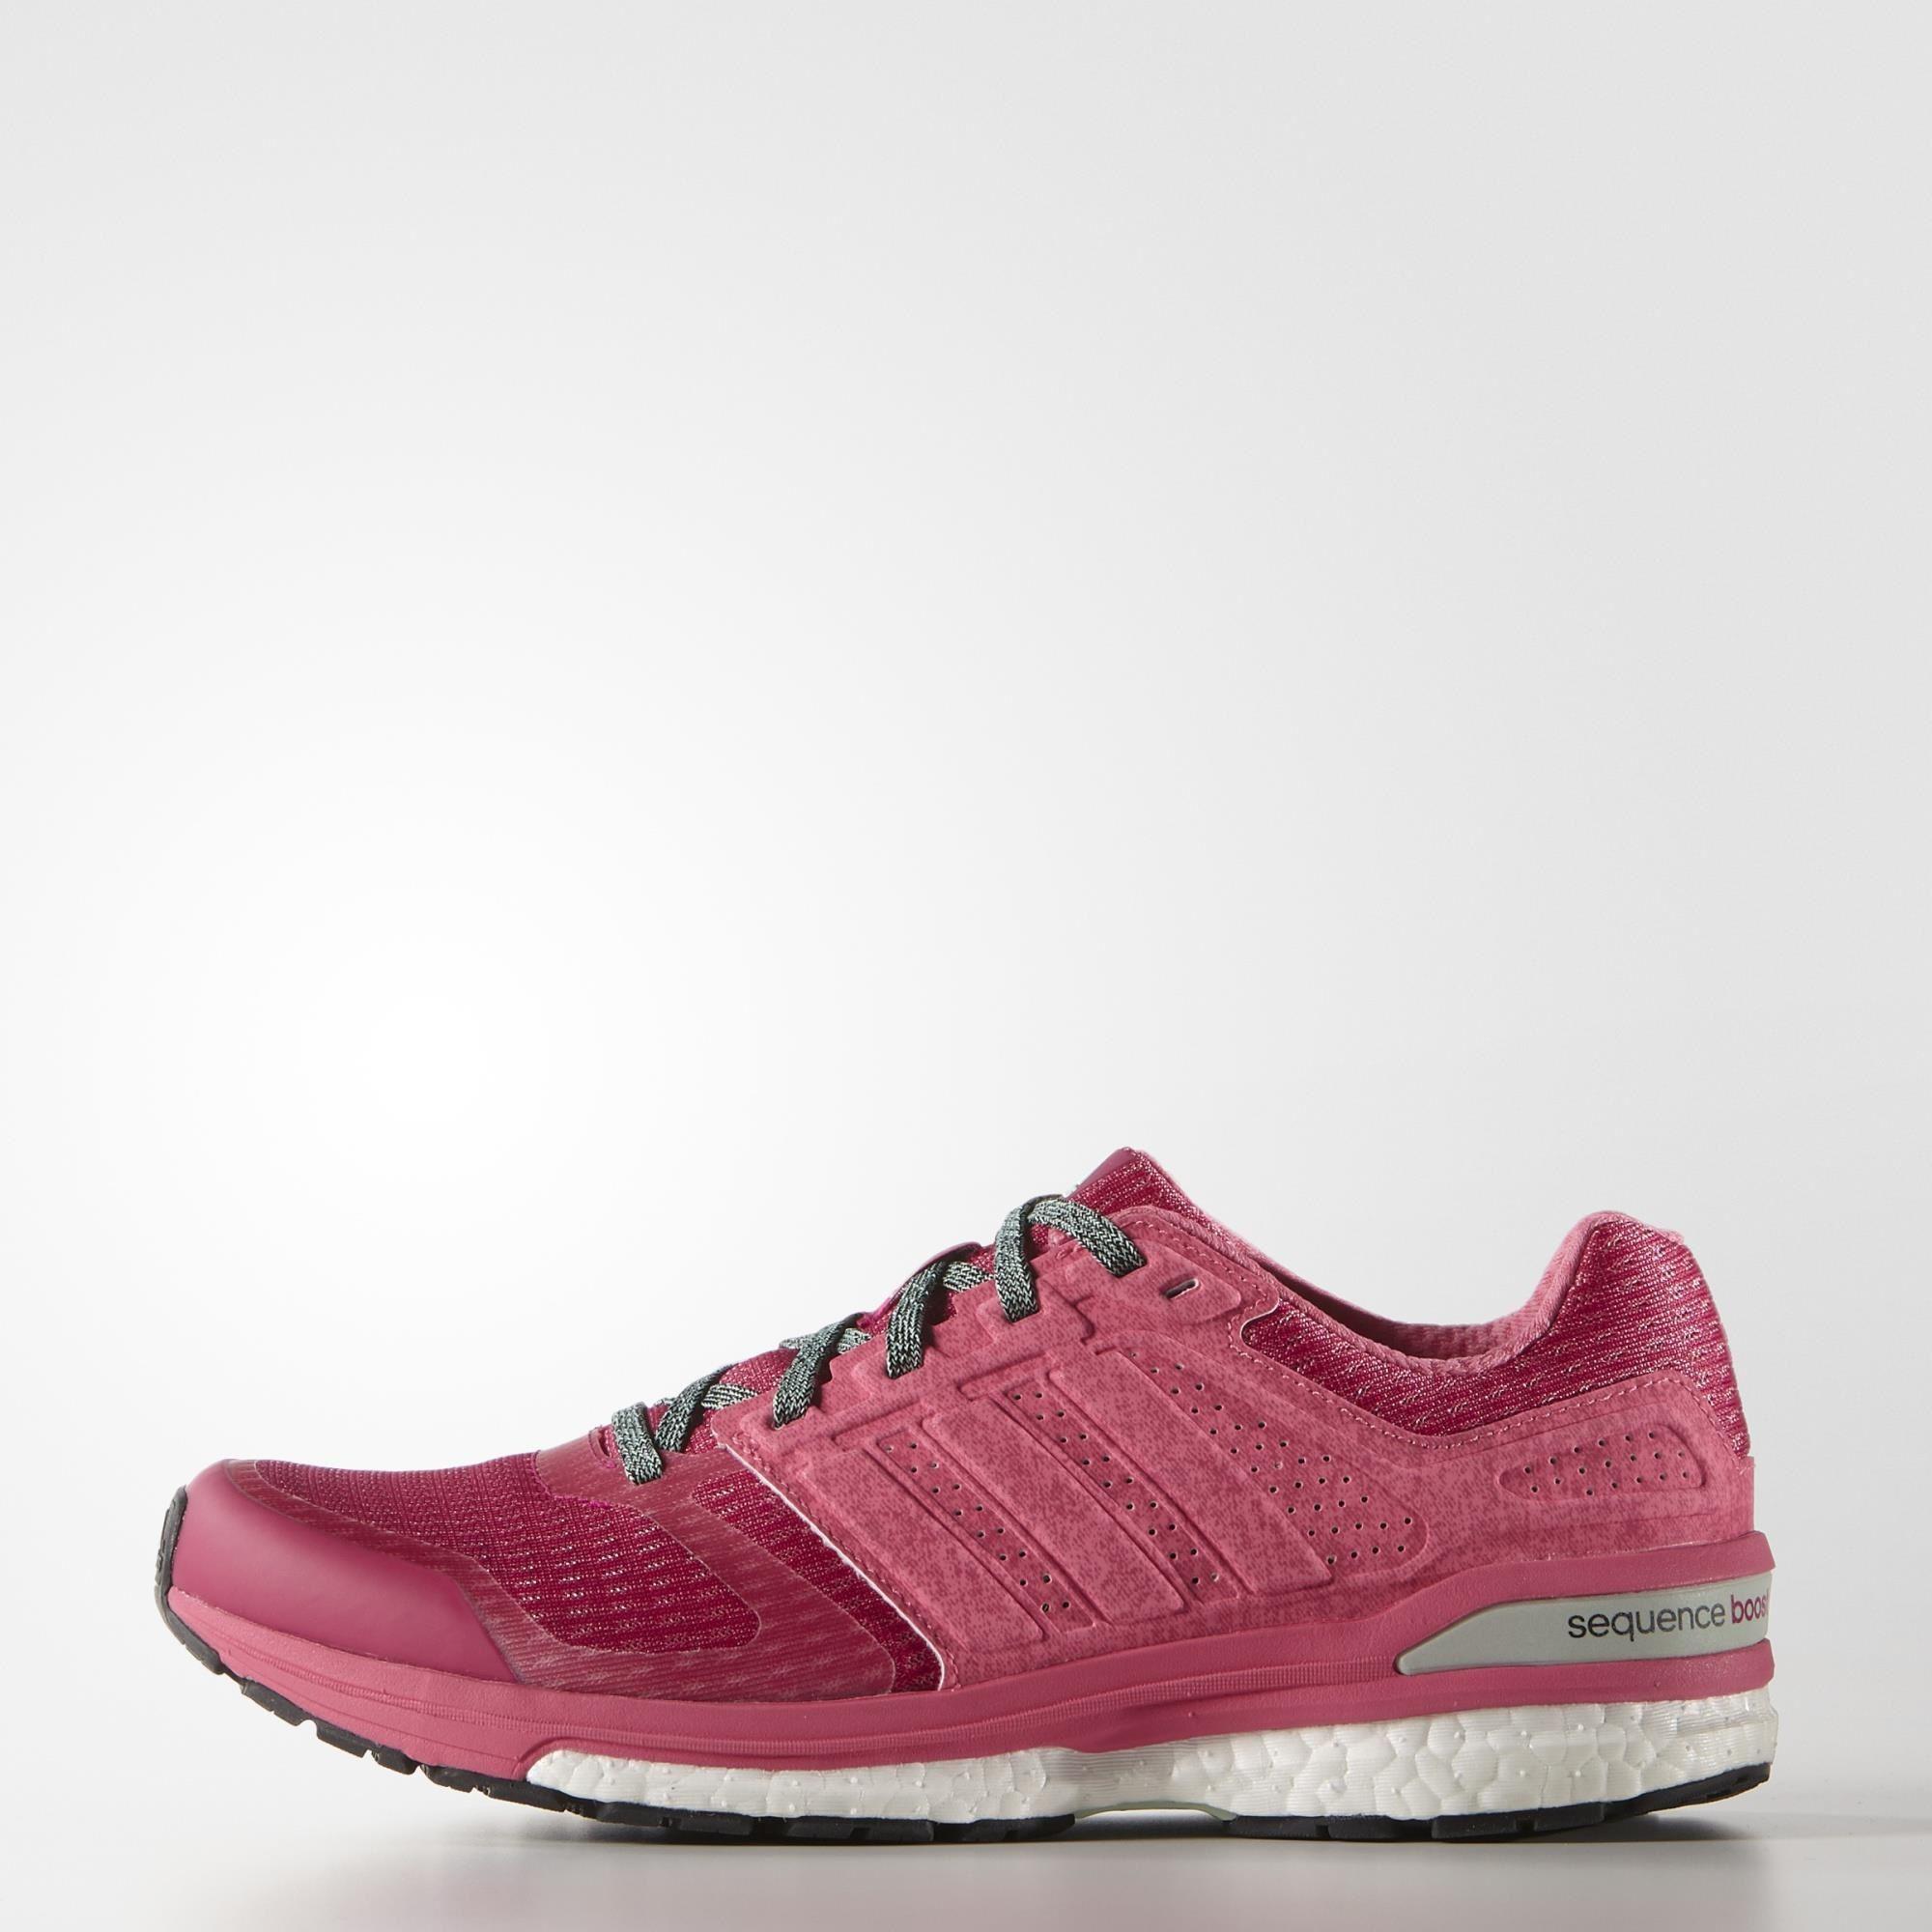 Adidas Womens Supernova Sequence 8 Boost Running Shoes - Pink ...